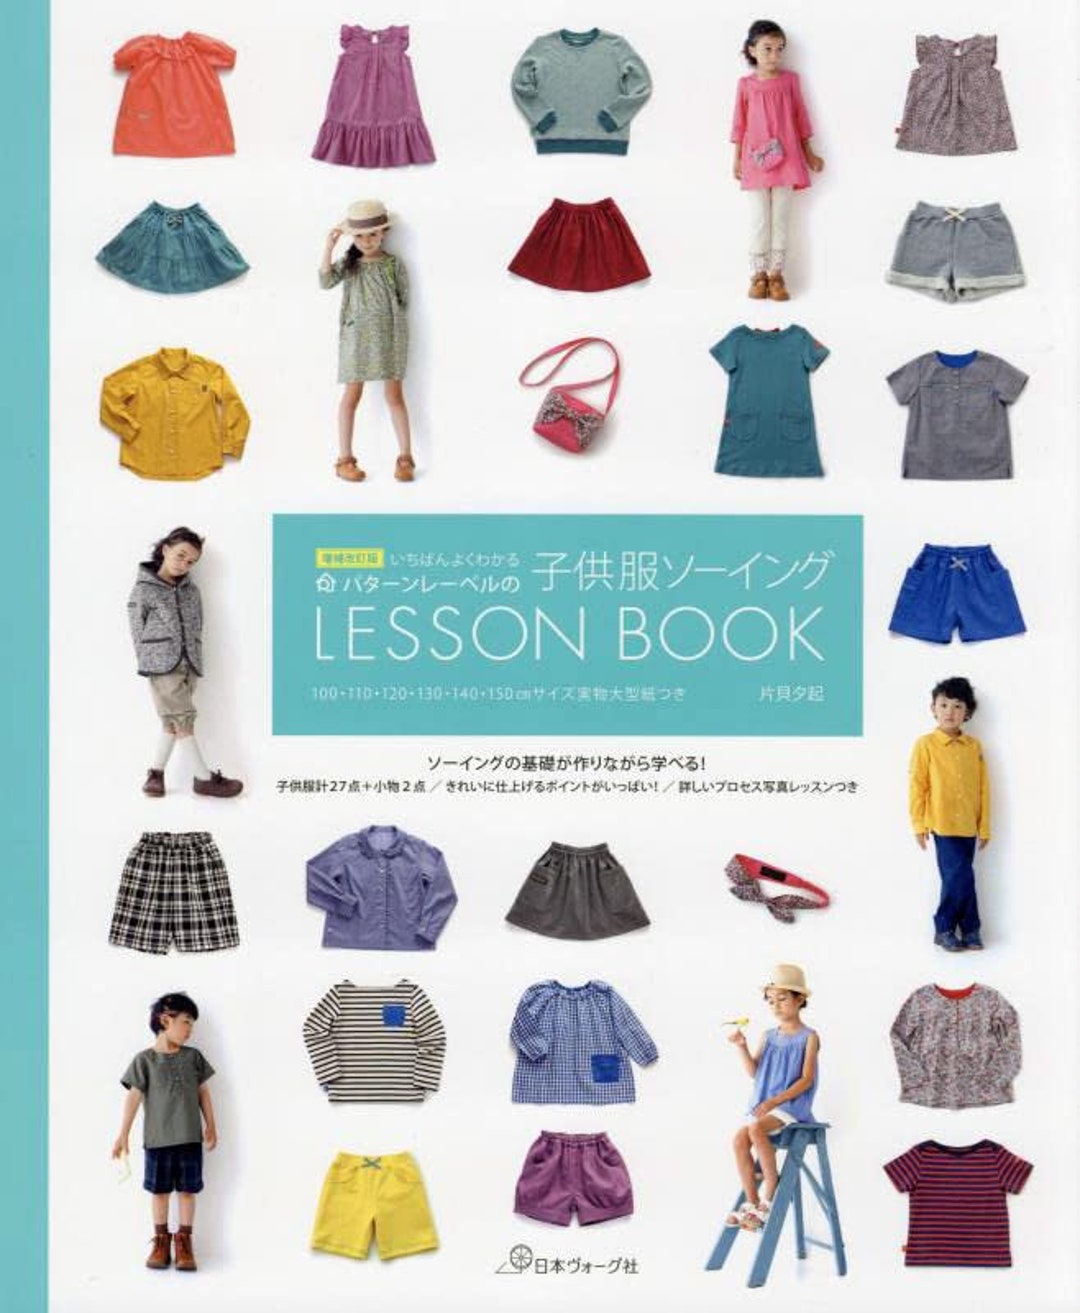 kids sewing patterns – Japanese Sewing, Pattern, Craft Books and